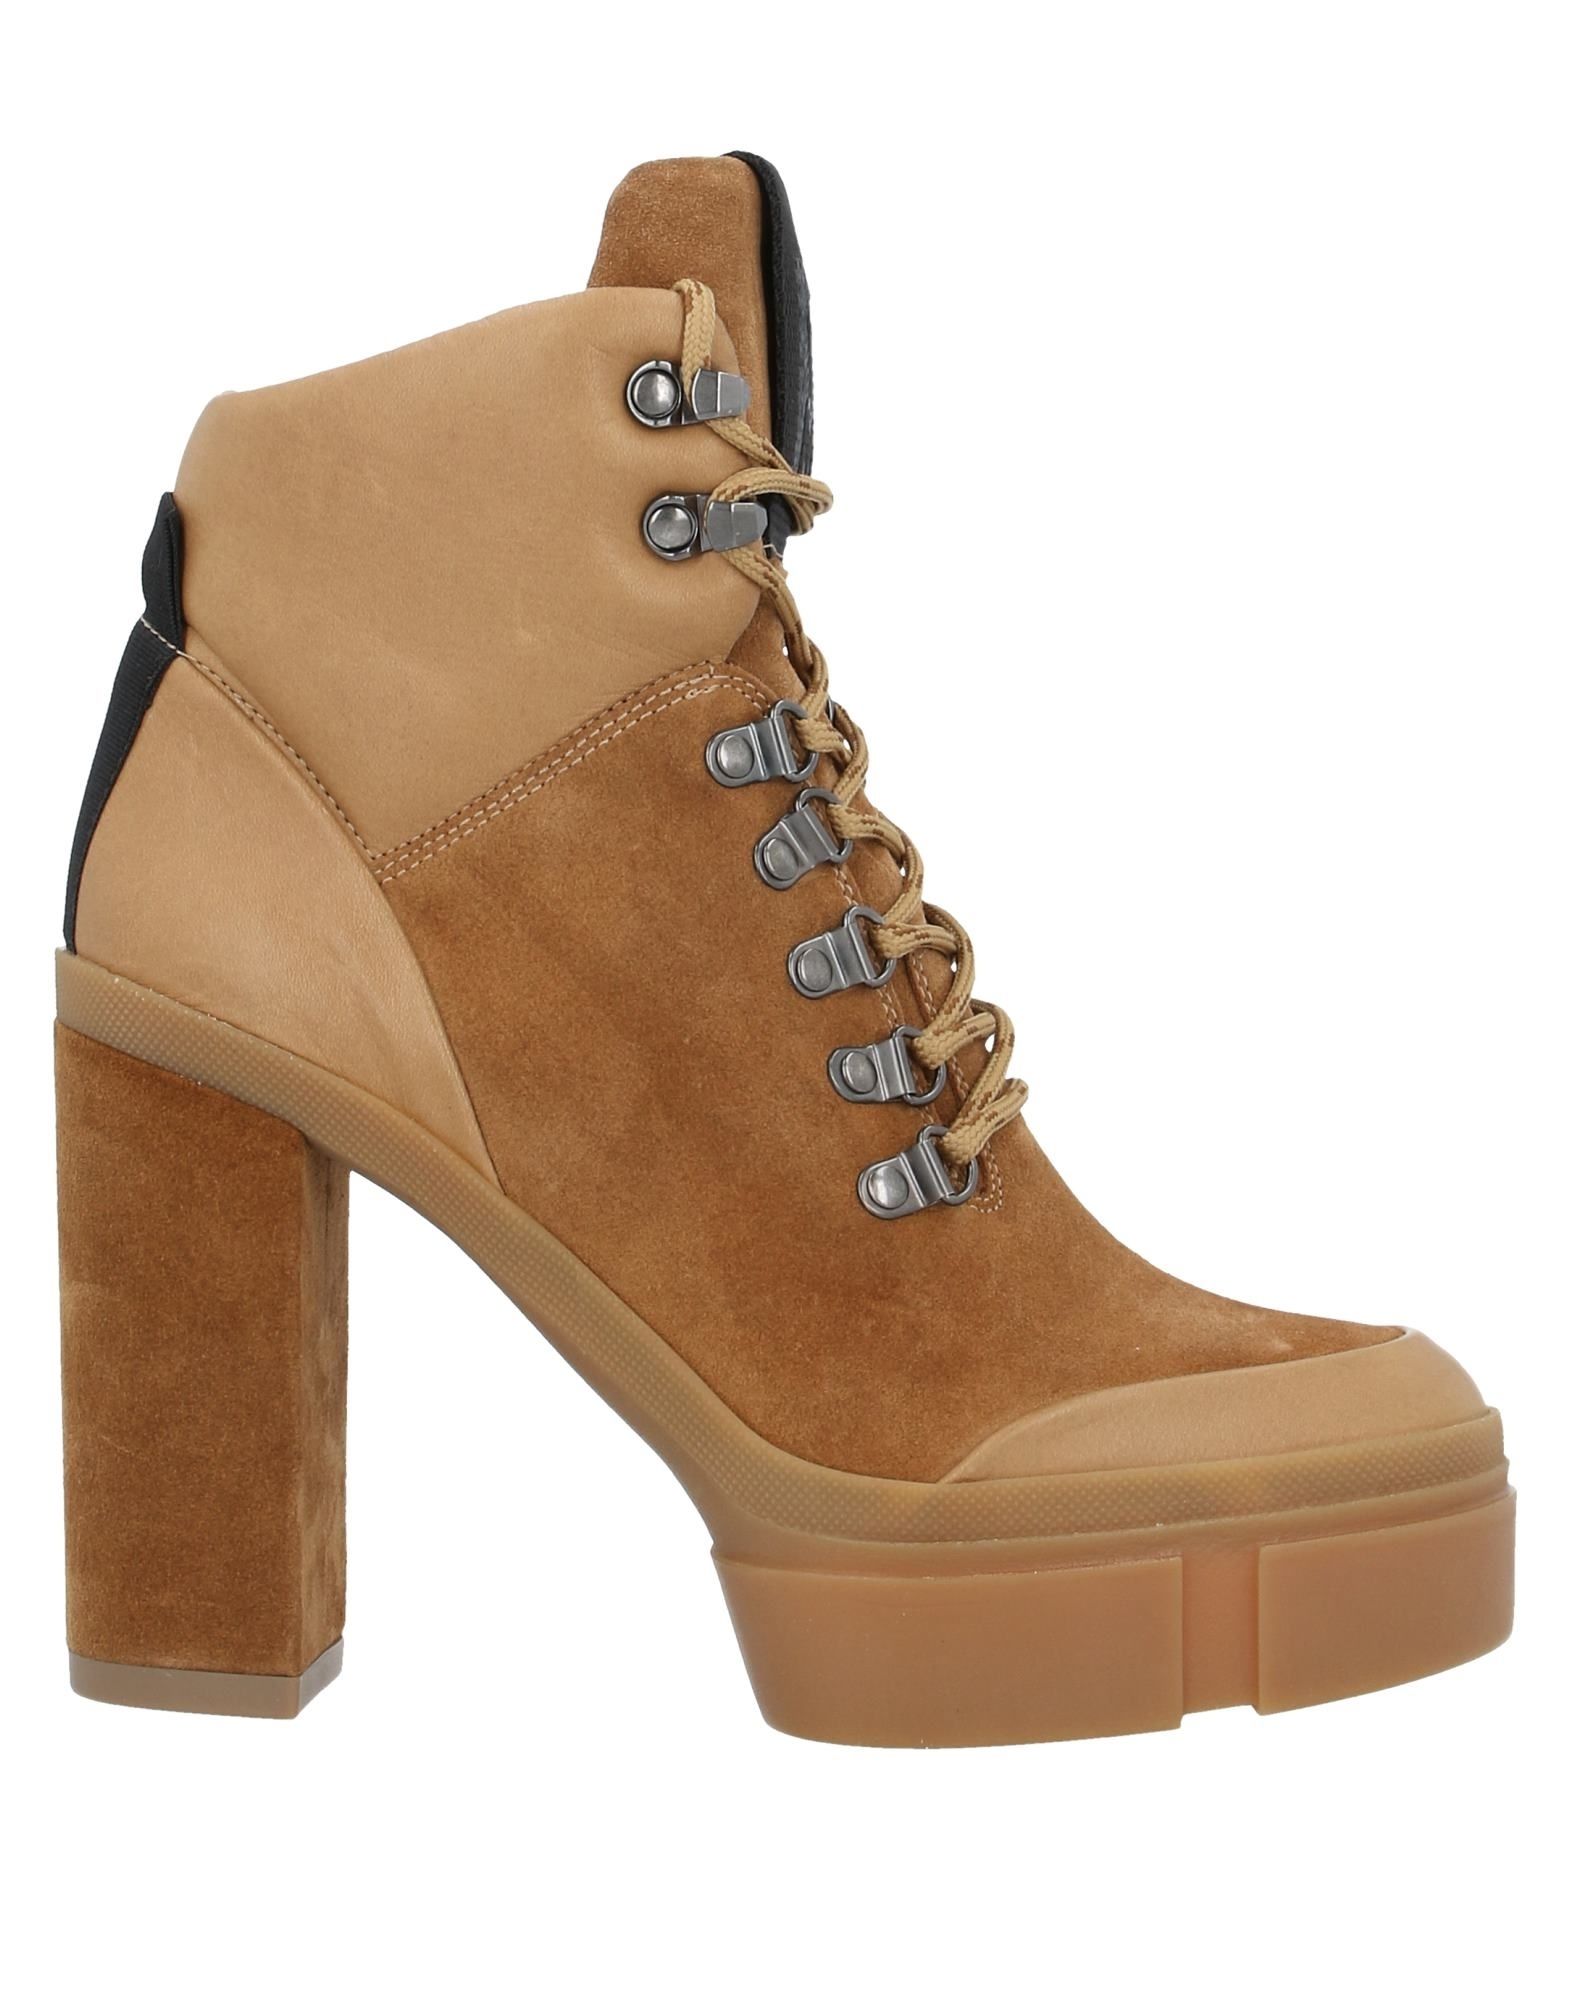 VIC MATIE Ankle boots - Item 11866543